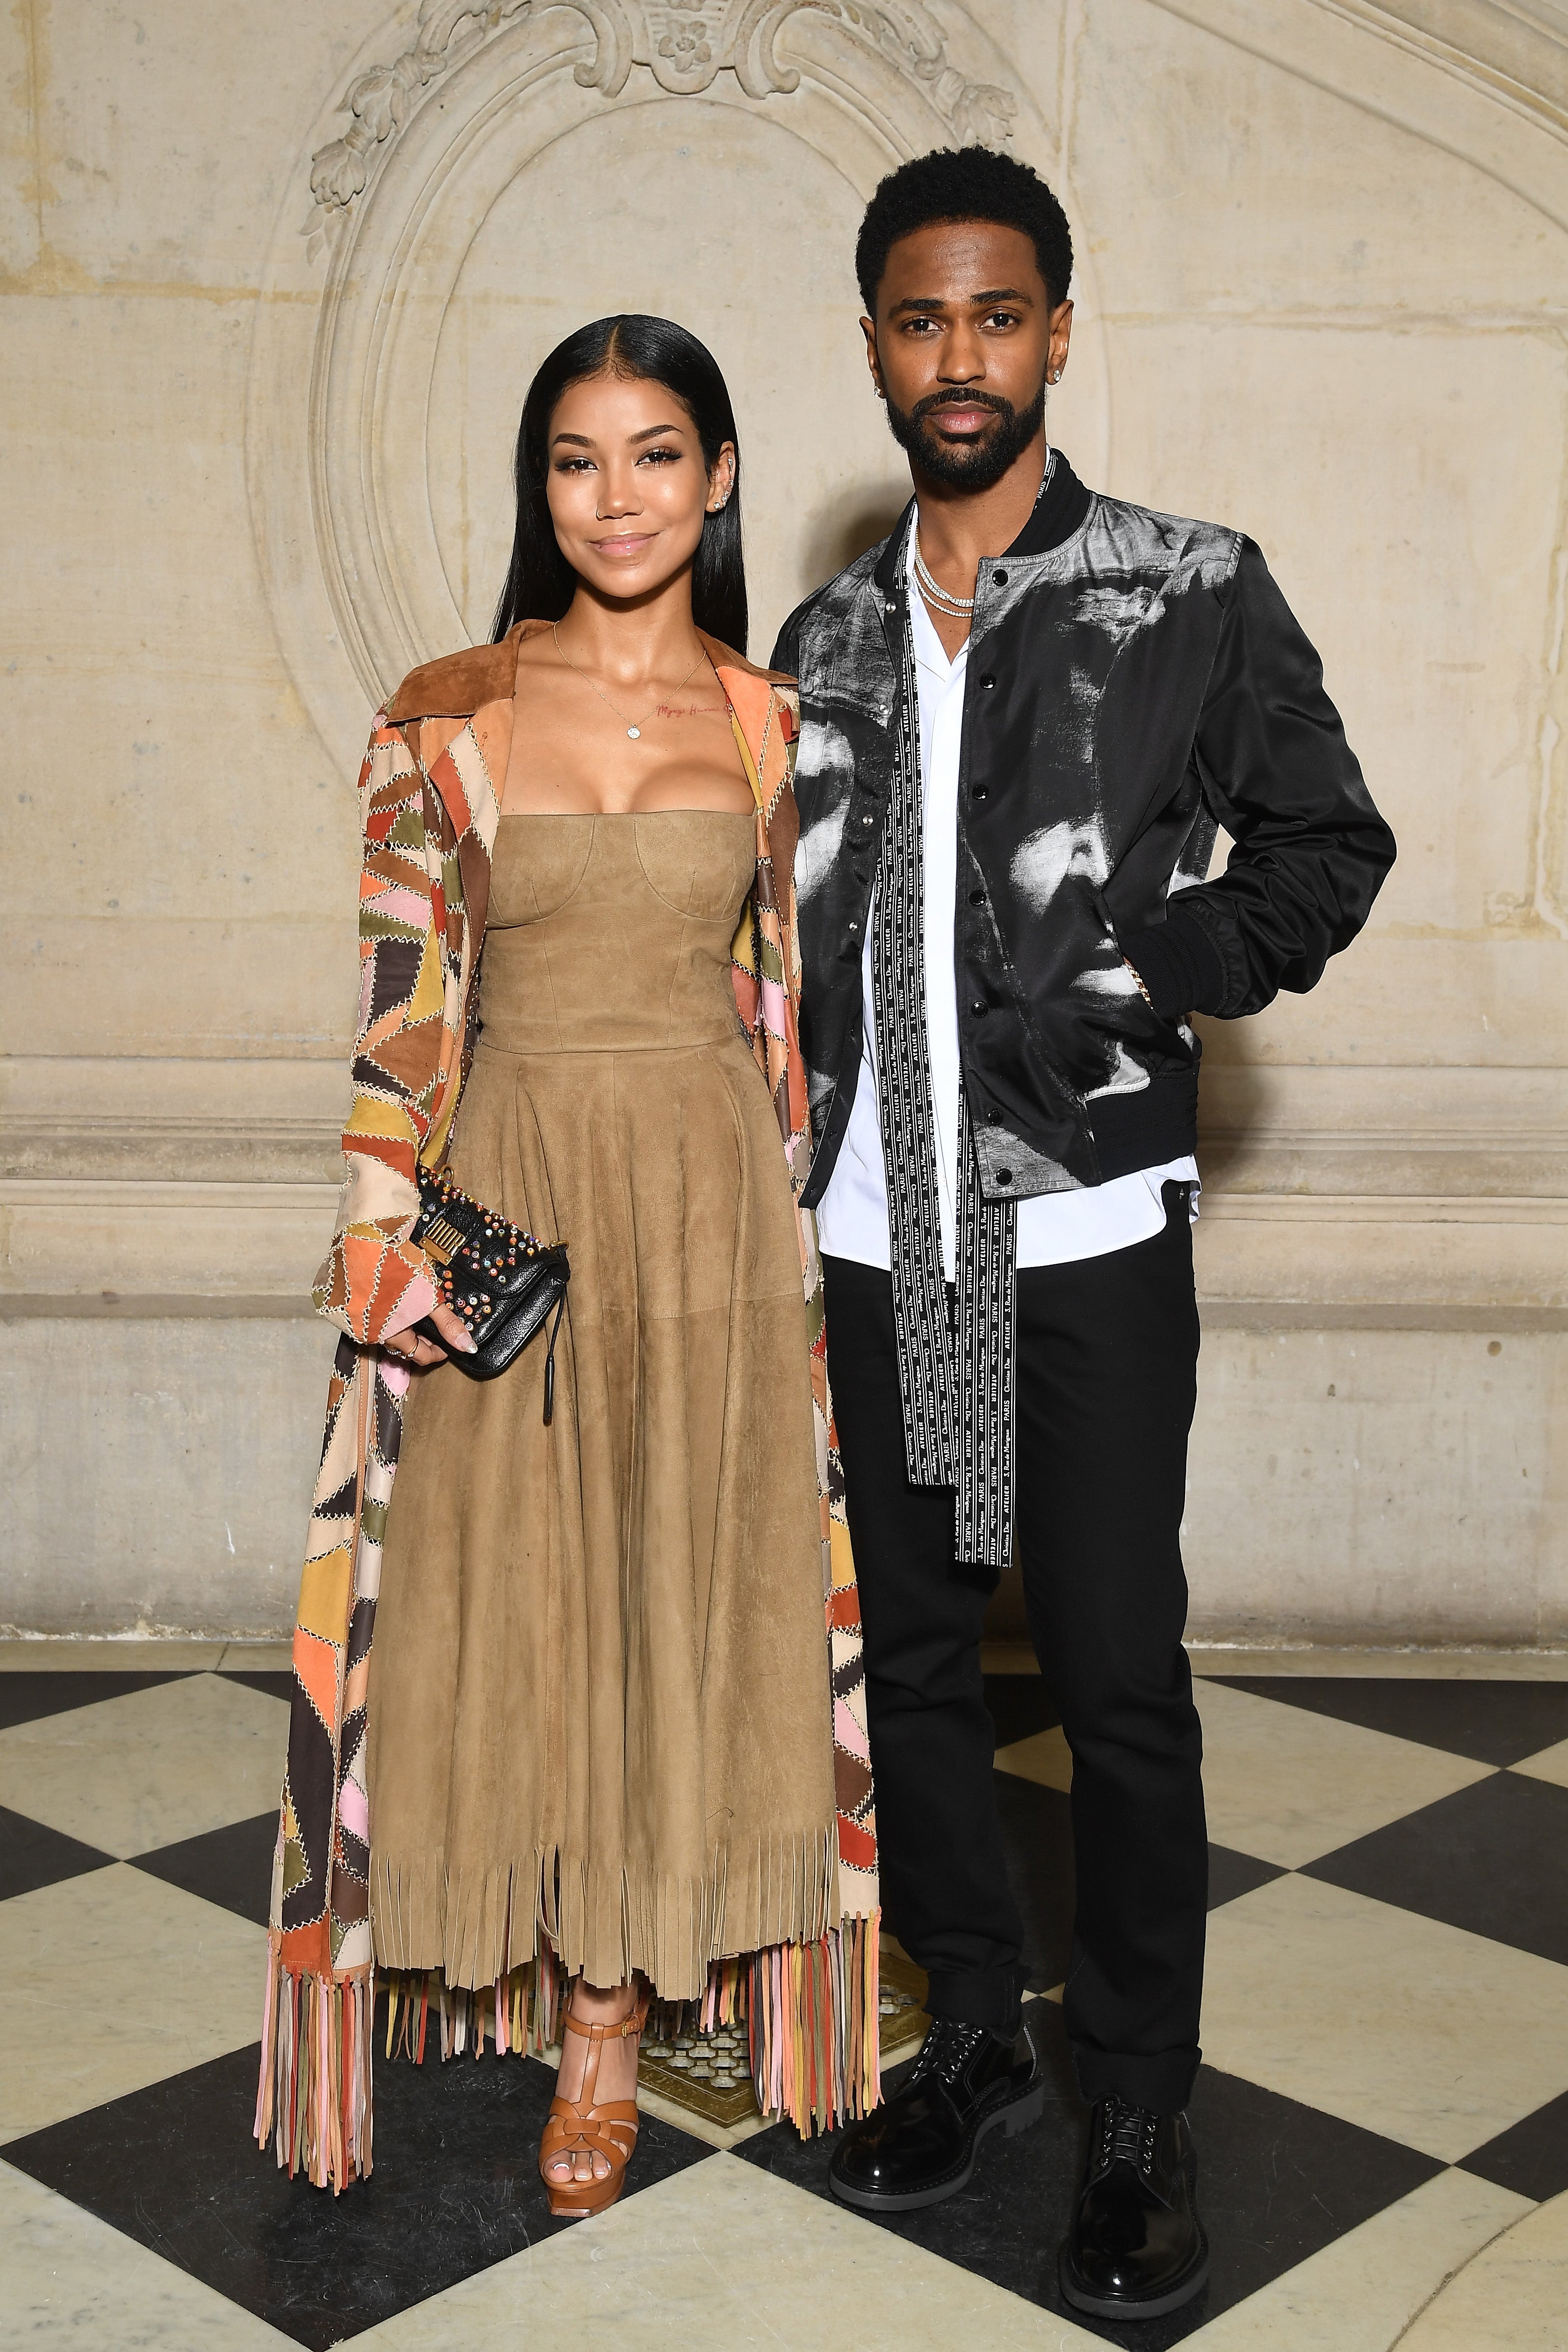 Big Sean Wishes Girlfriend Jhene Aiko A Happy Birthday: 'I Love You The Most Forever'